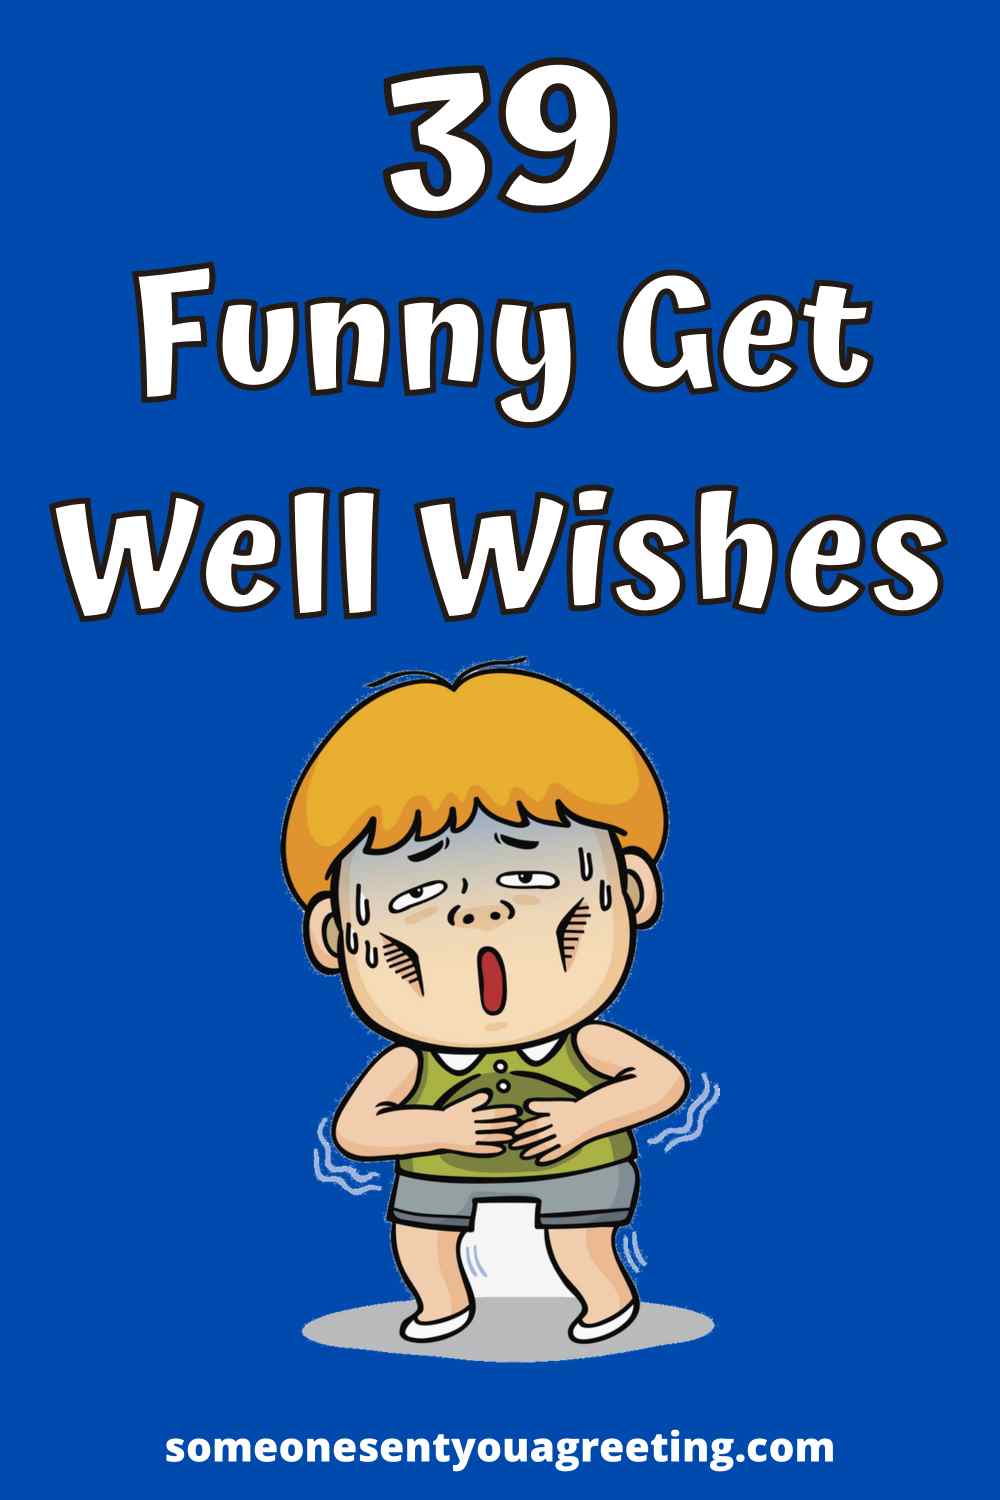 39 Funny Get Well Wishes and Messages